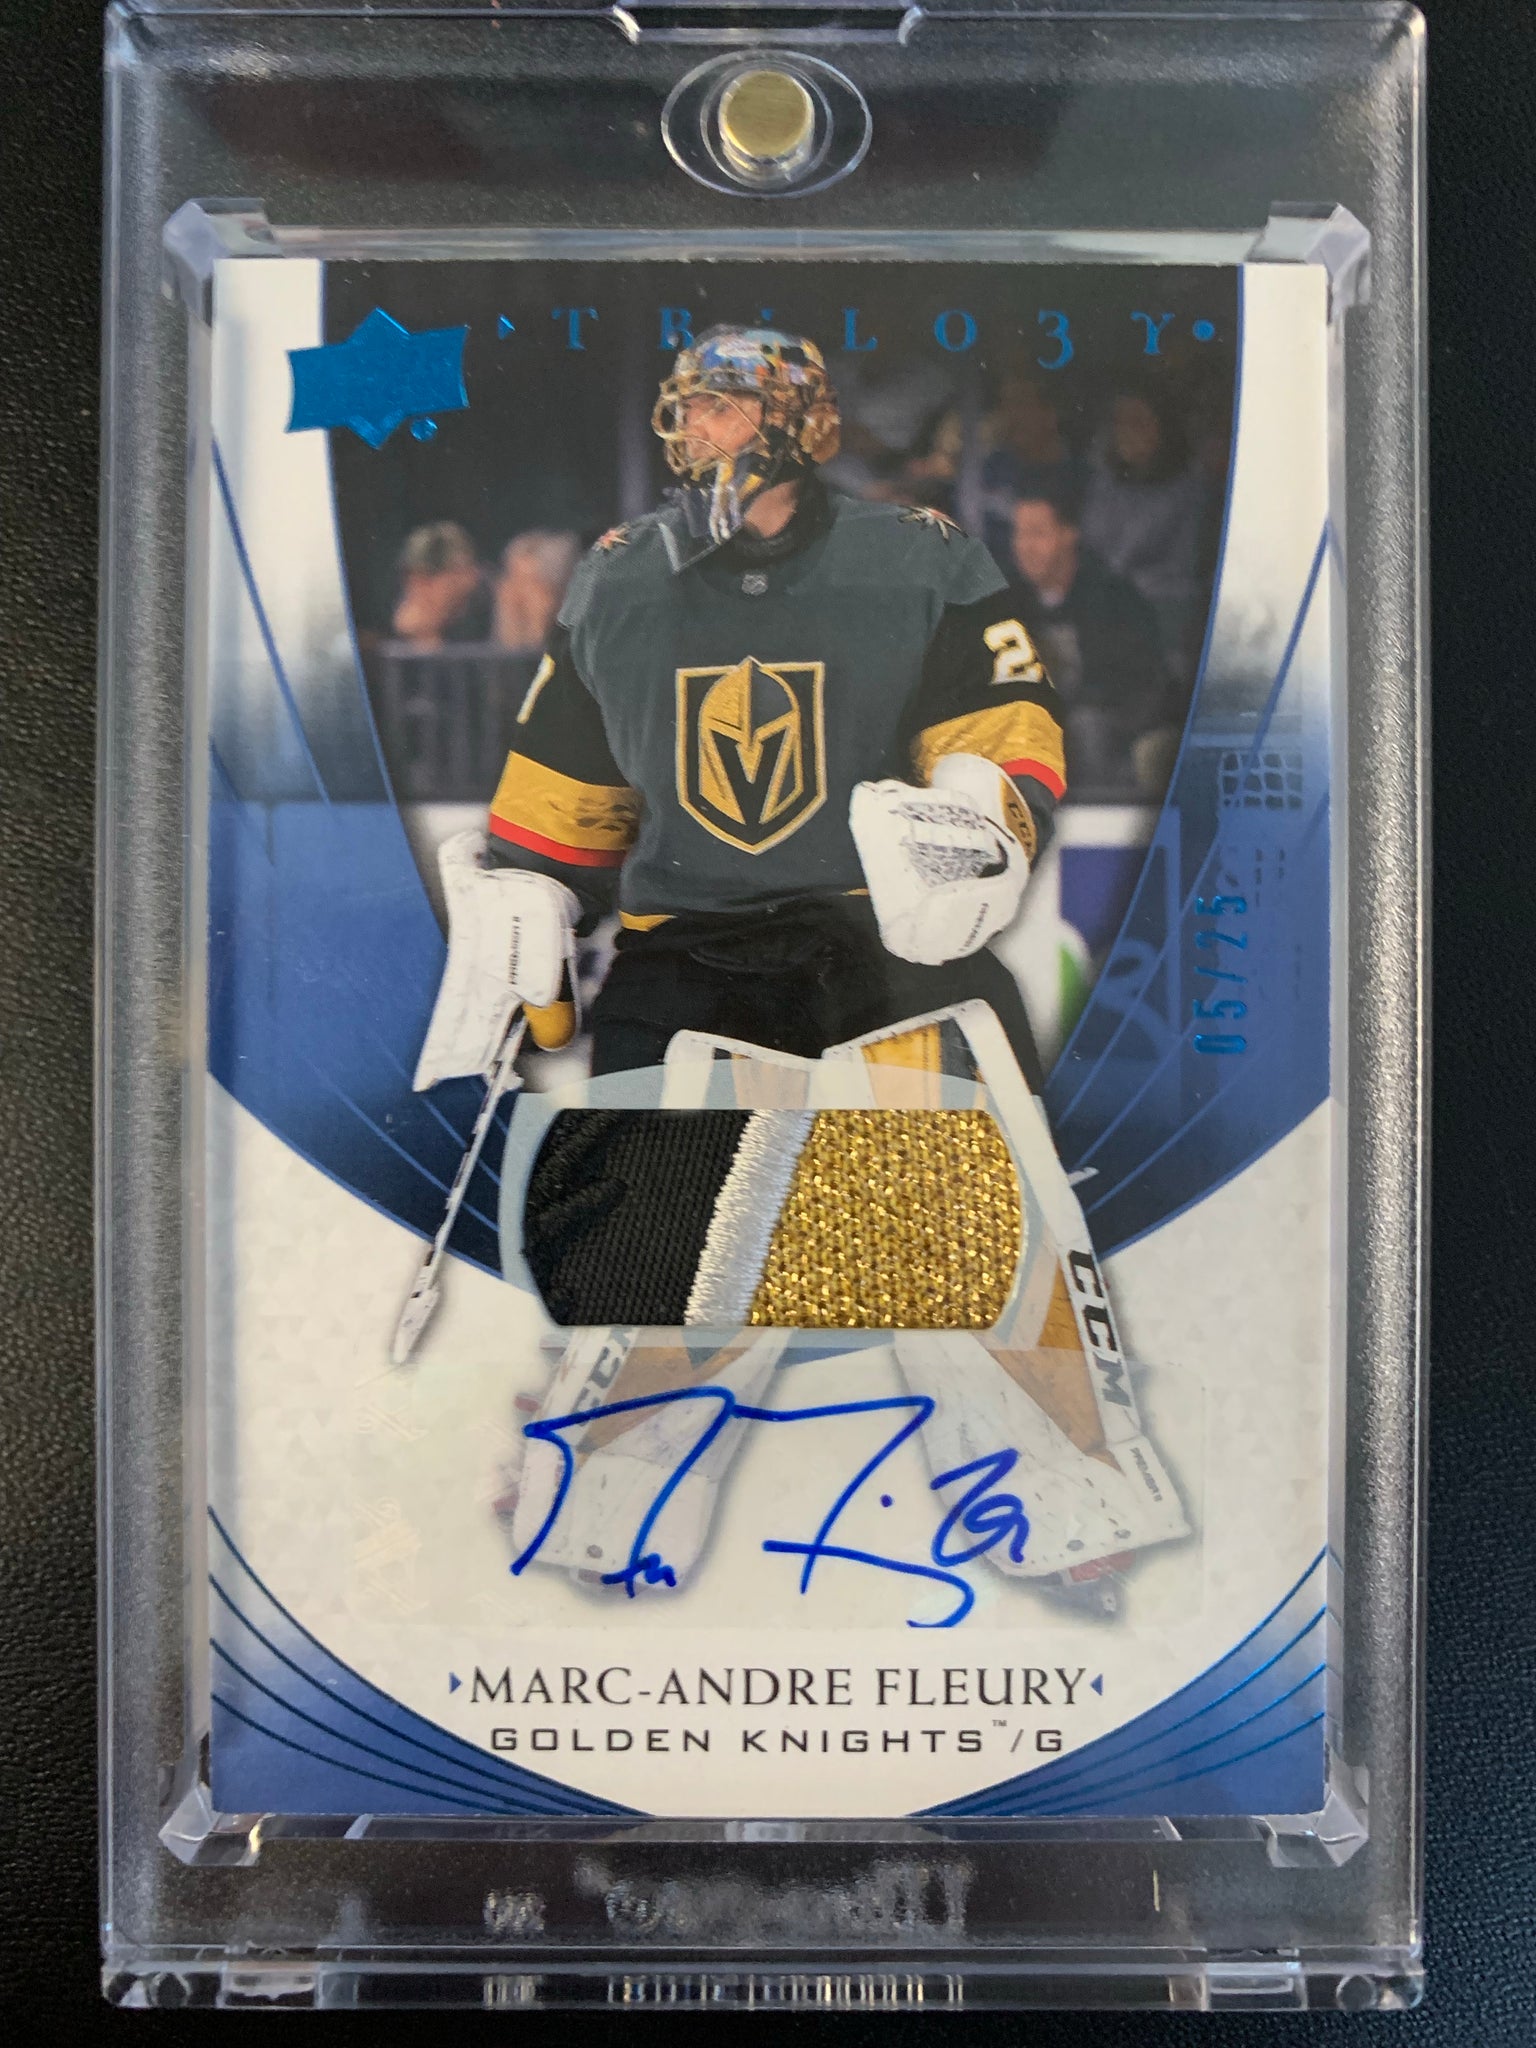 2020-21 UPPER DECK TRILOGY HOCKEY #46 VEGAS GOLDEN KNIGHTS - MARC ANDRE FLEURY AUTOGRAPHED PATCH SERIAL NUMBERED 05/25